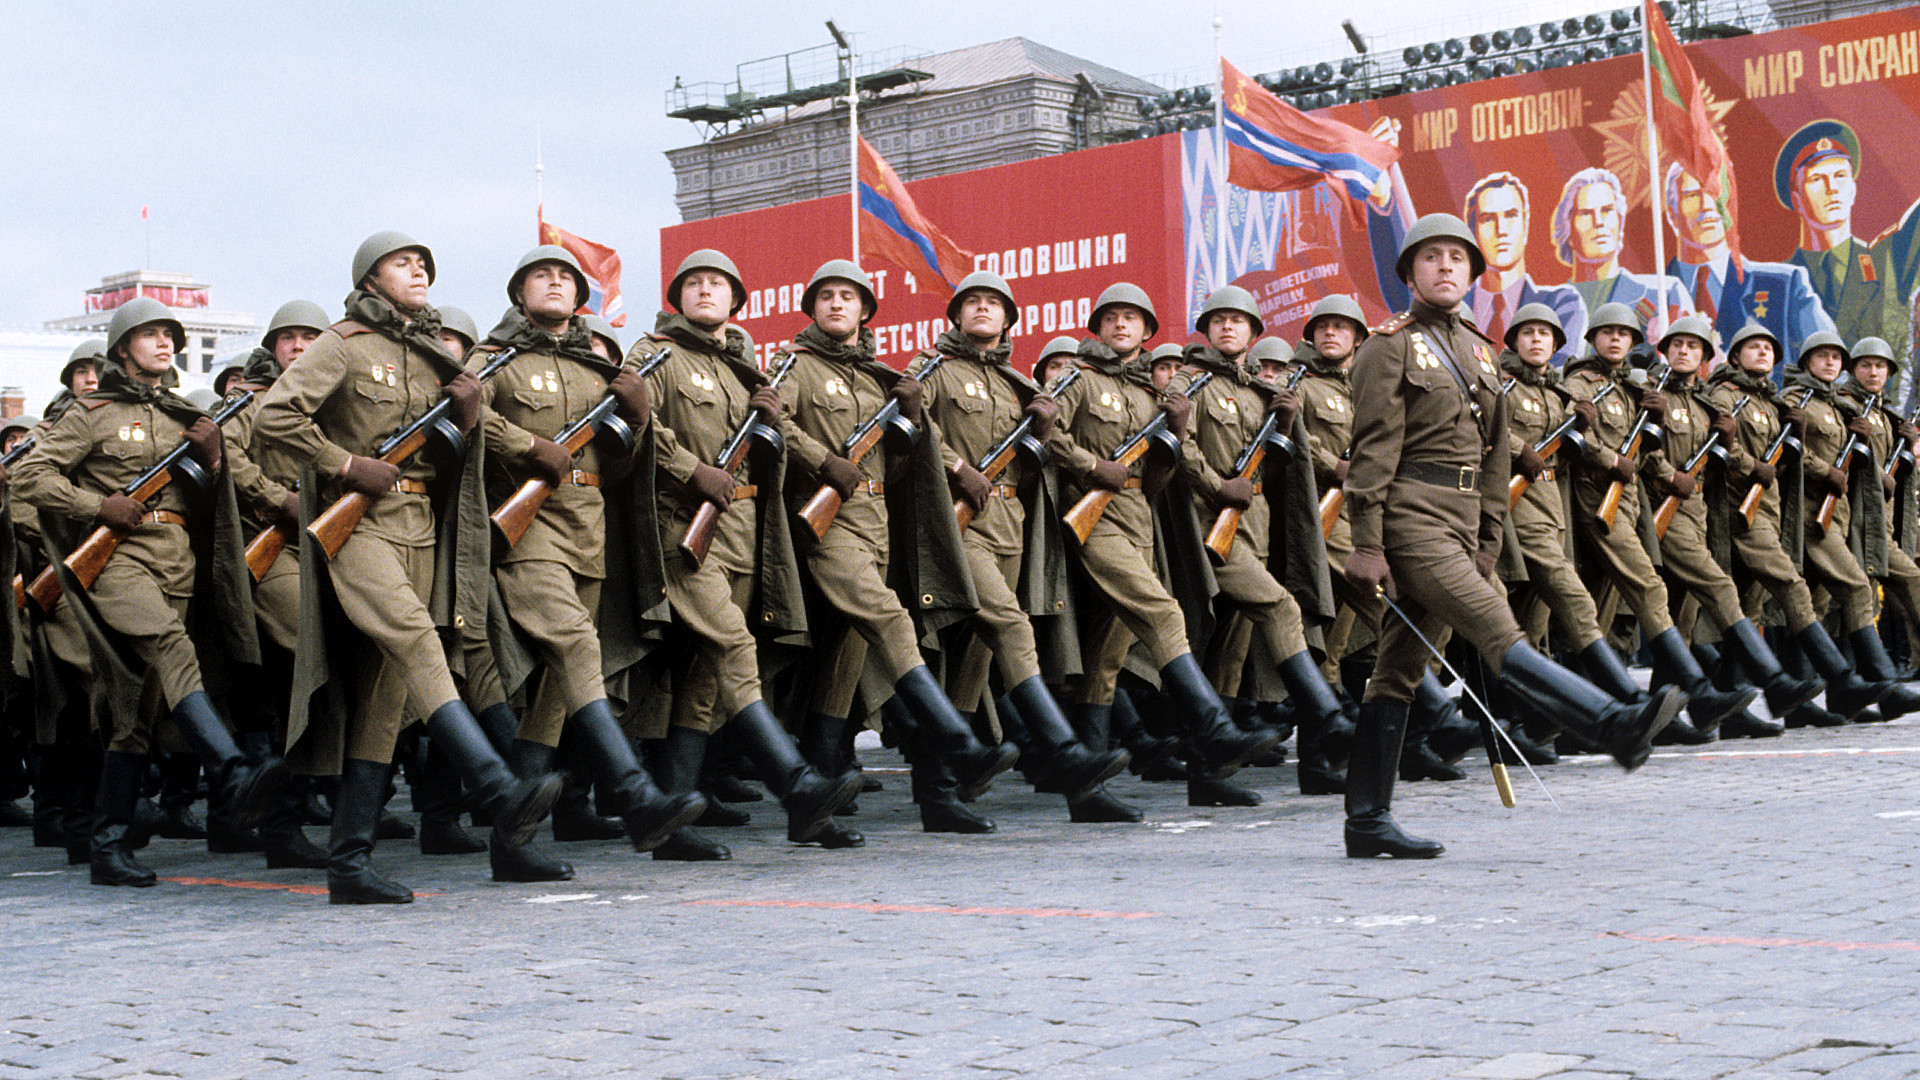 8 amazing facts about Moscow’s Victory Day Parade you never knew Russia Beyond